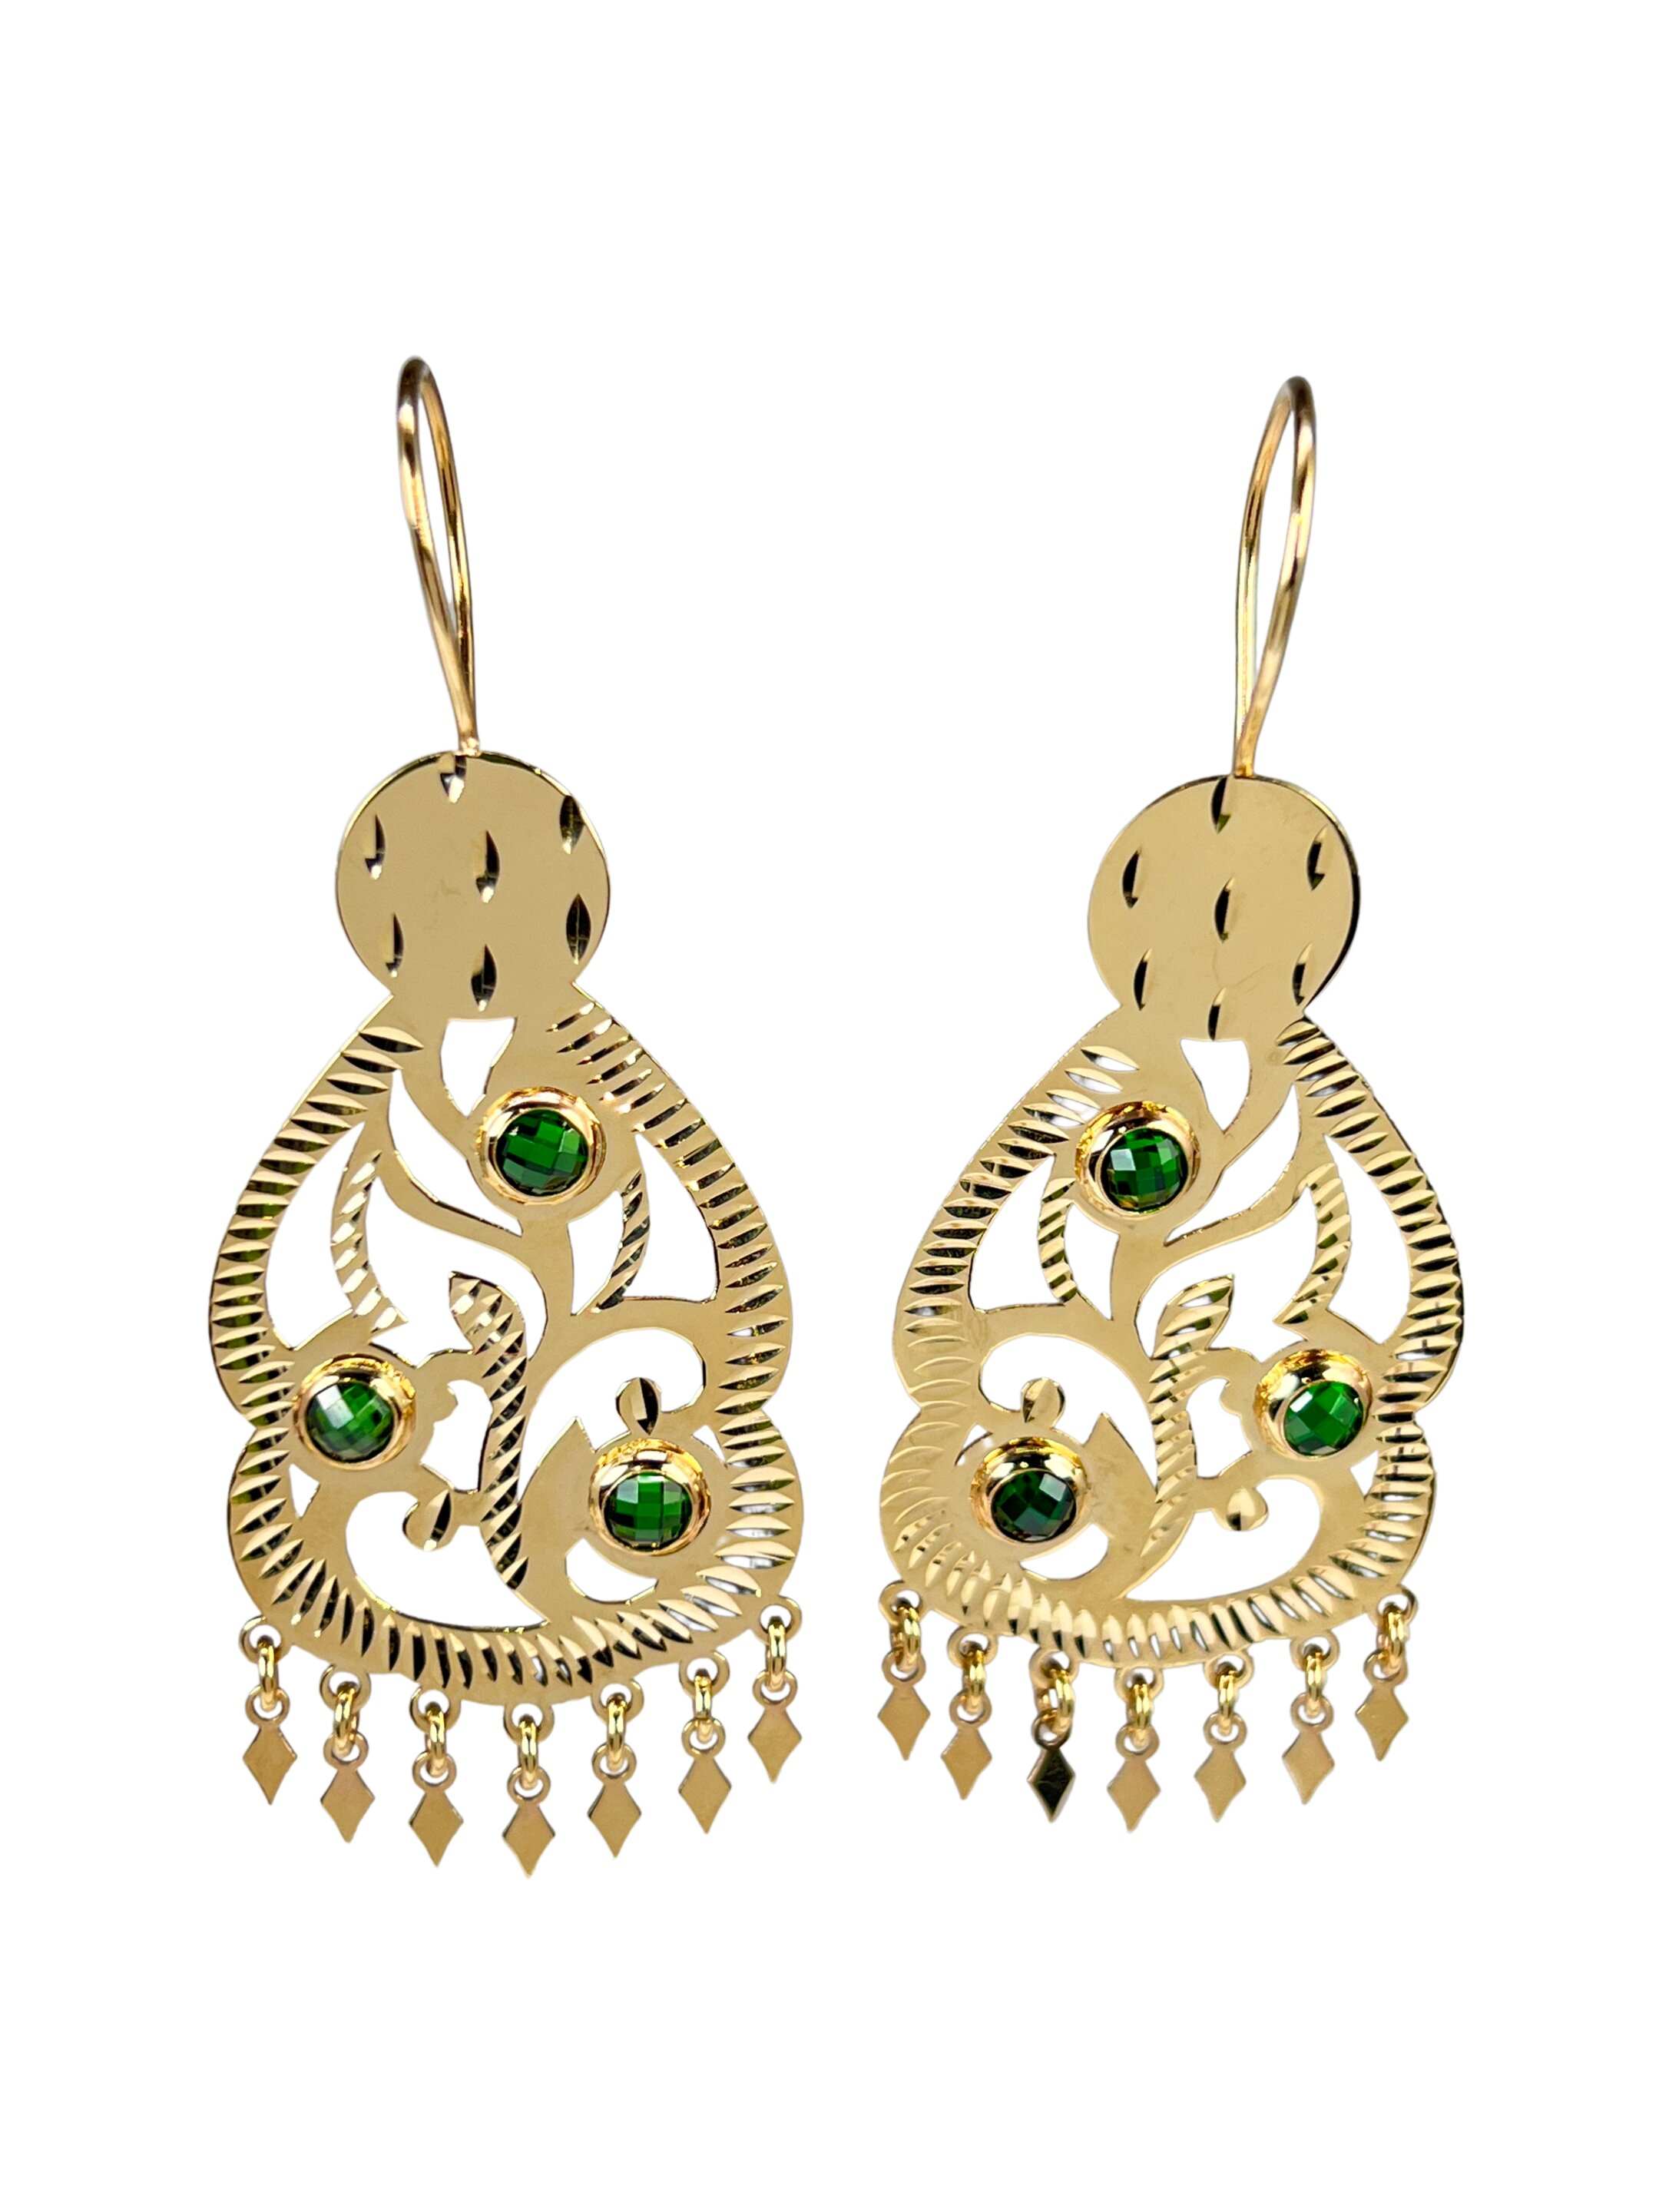 Dangling gold earrings with green zircons and Loren engraving